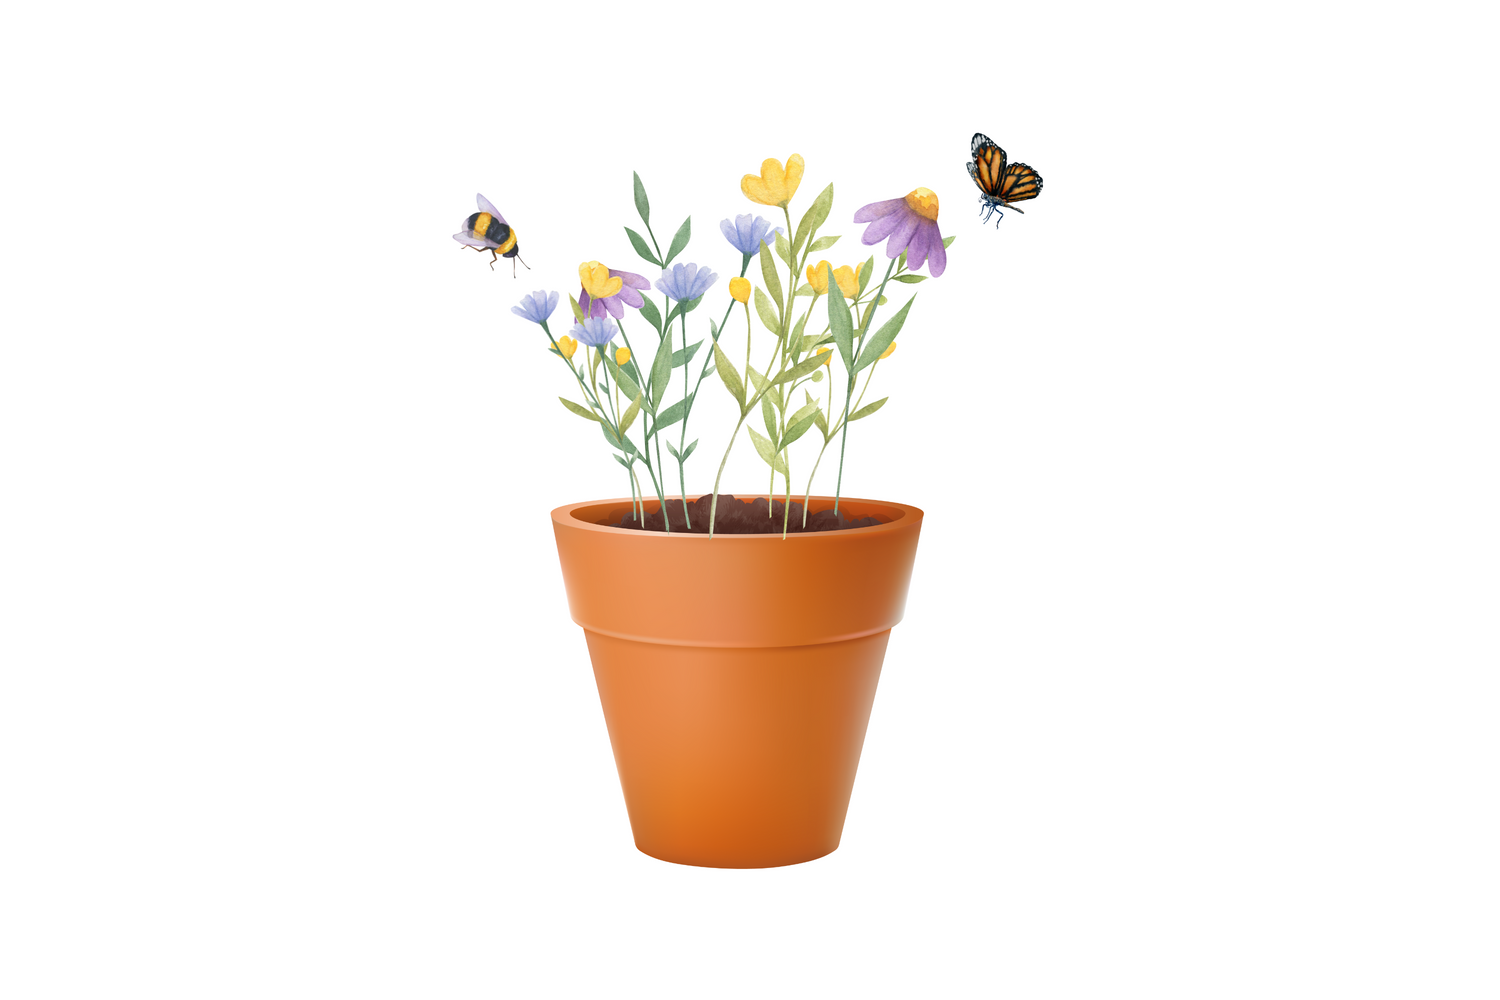 graphic of a plant pot with wildflowers and bees